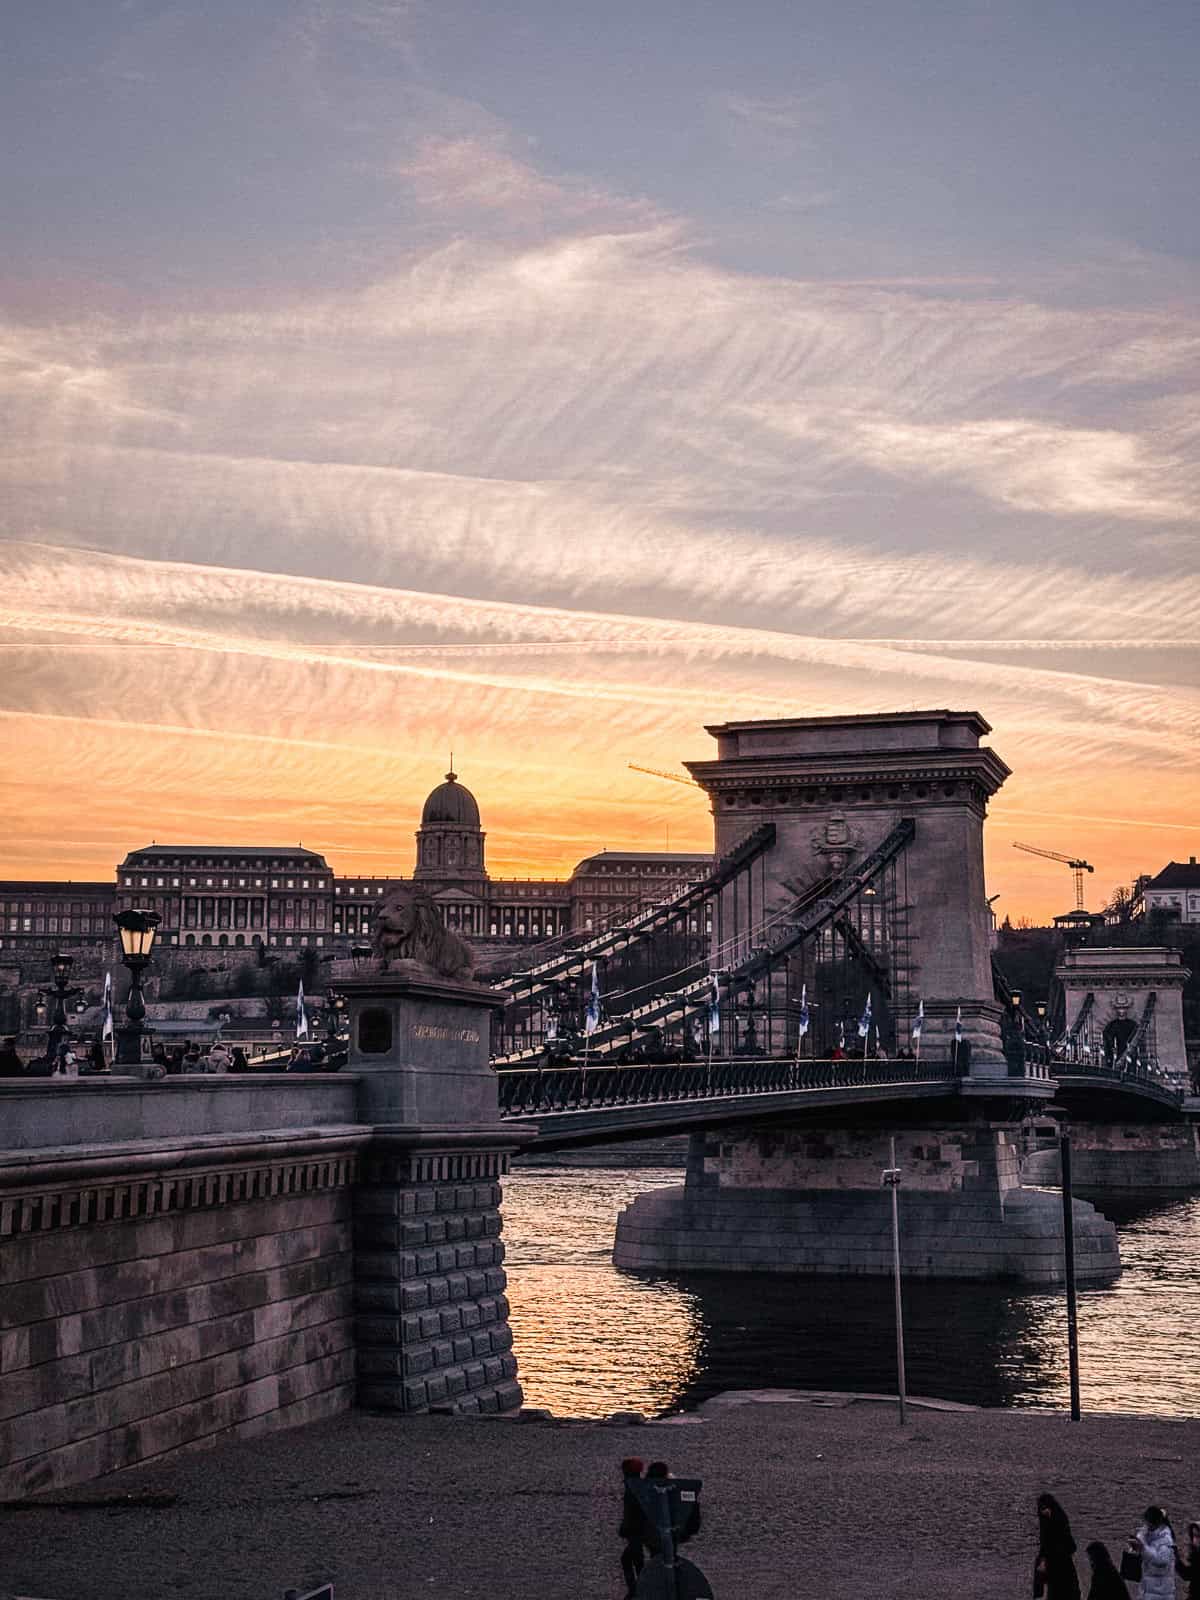 The Budapest chain bridge from a different angle, captured at sunset with an orange and pink sky, highlighting the silhouette of the bridge and historical buildings in the background.